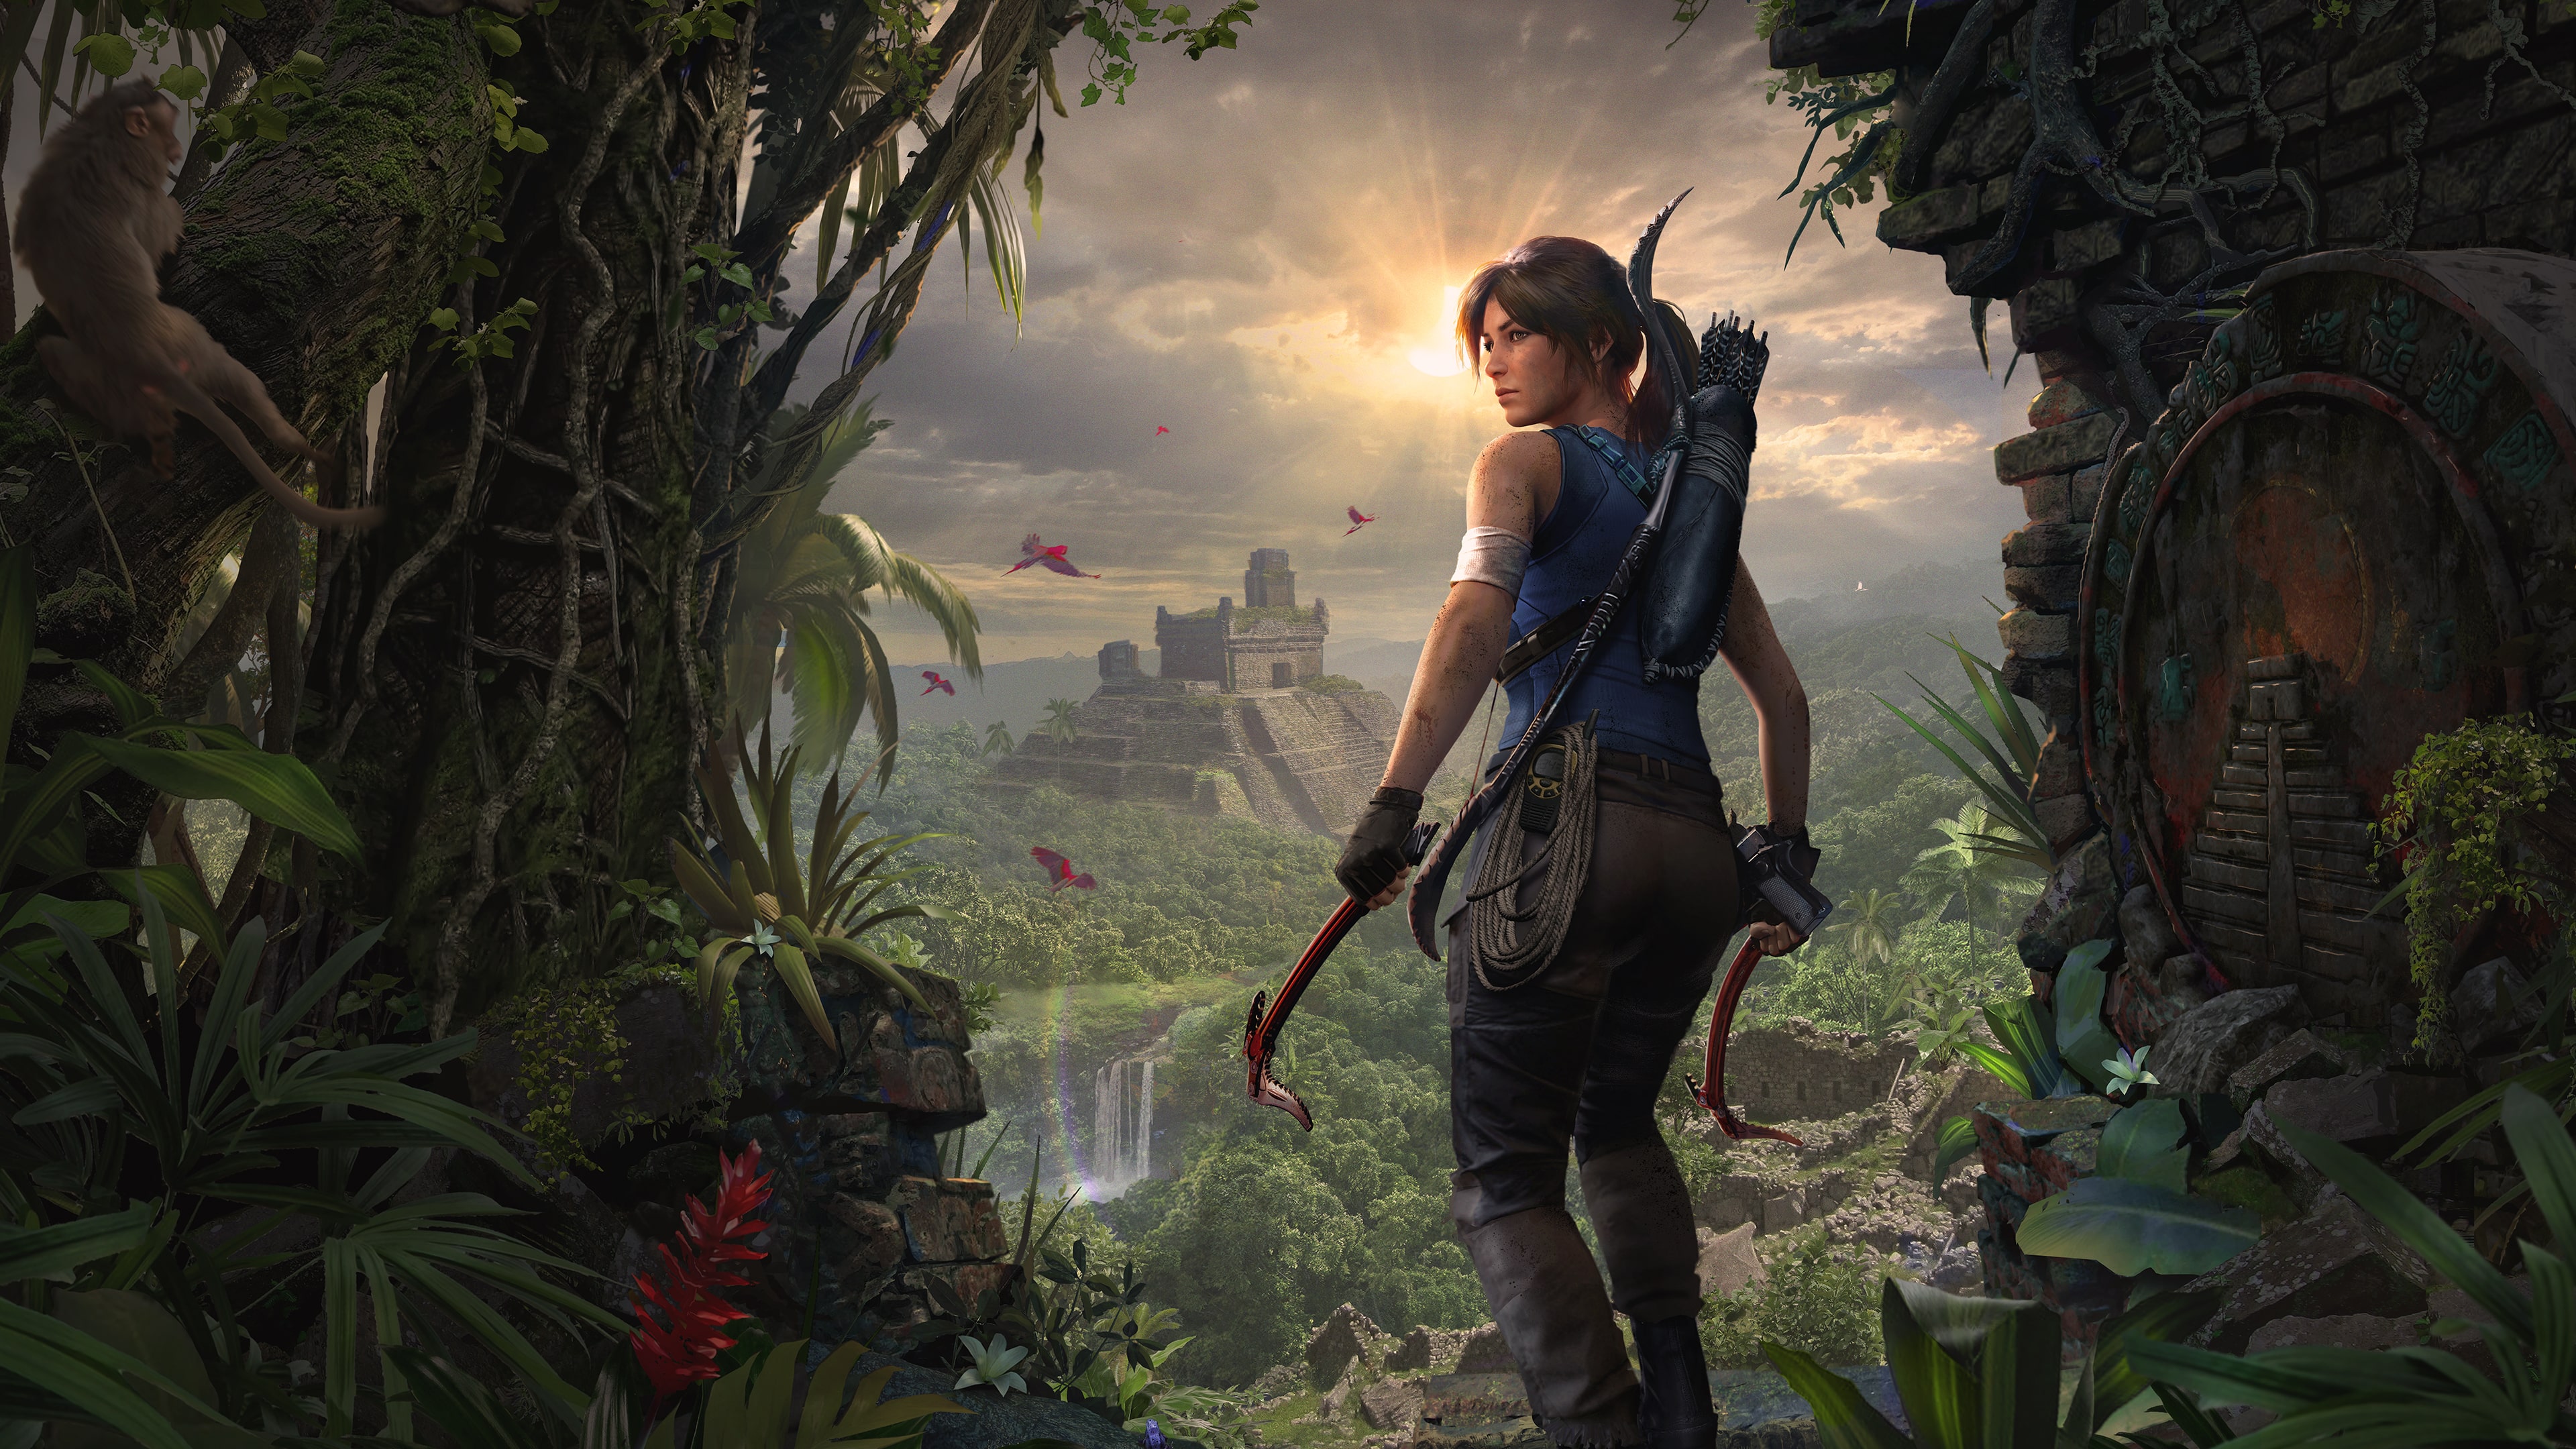 Shadow of the Tomb Raider: Definitive Edition (Simplified Chinese, English, Korean, Traditional Chinese)